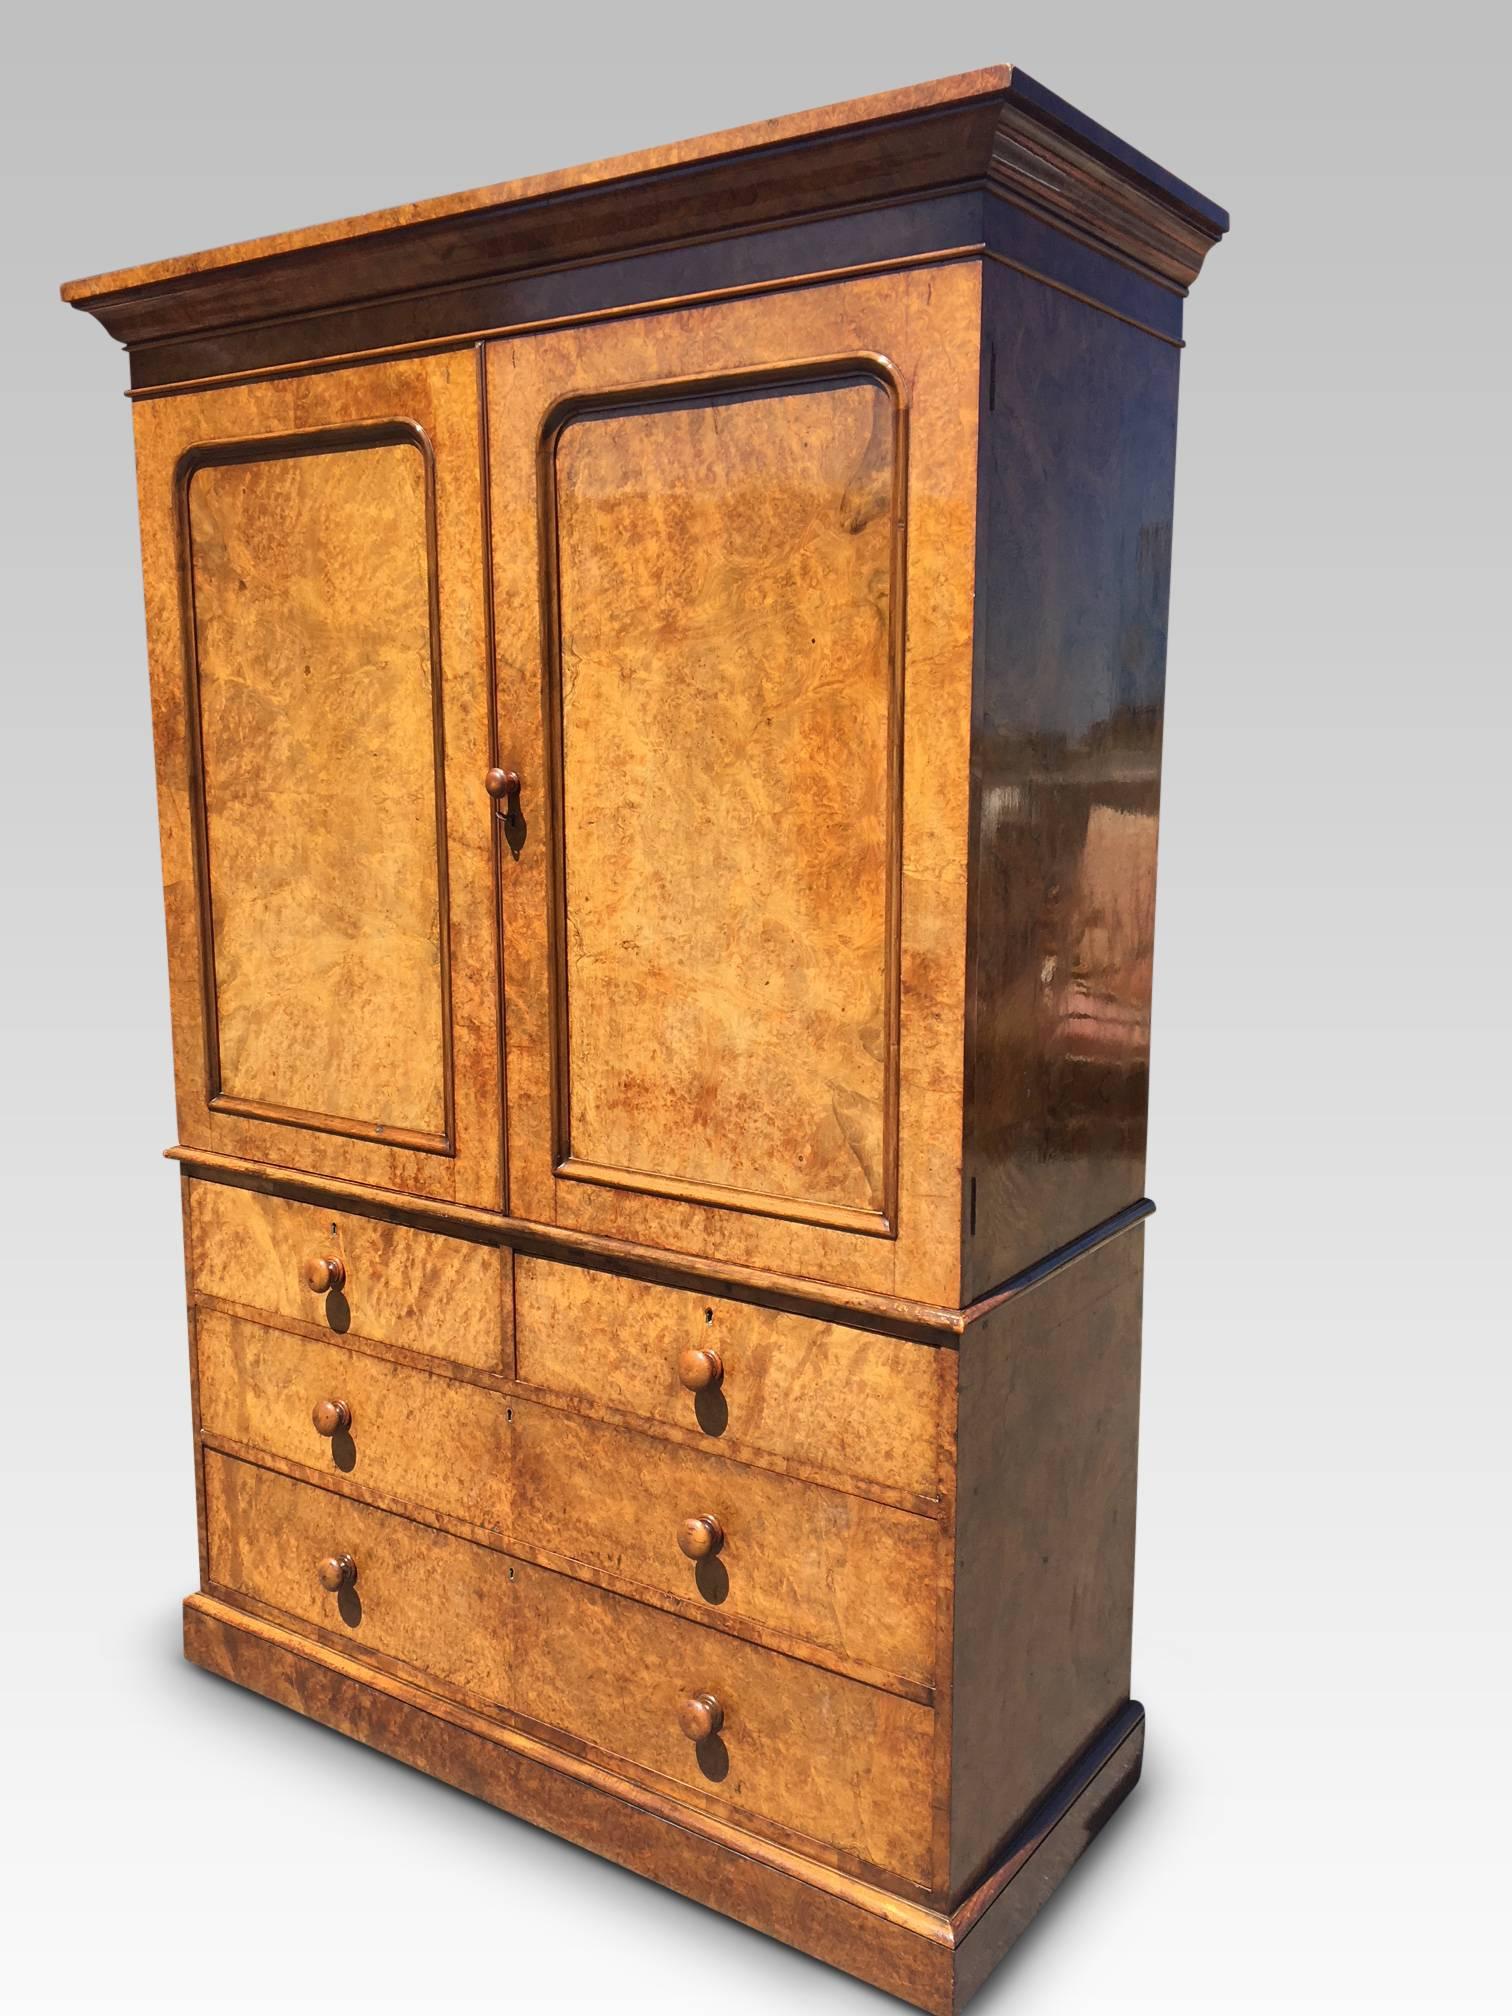 Fine quality English burr walnut linen press by the renowned company of Heal & Sons, London.

This delightful linen press is veneered in burr walnut on mahogany. The top sections doors close neatly, are flat and open to reveal four beautifully